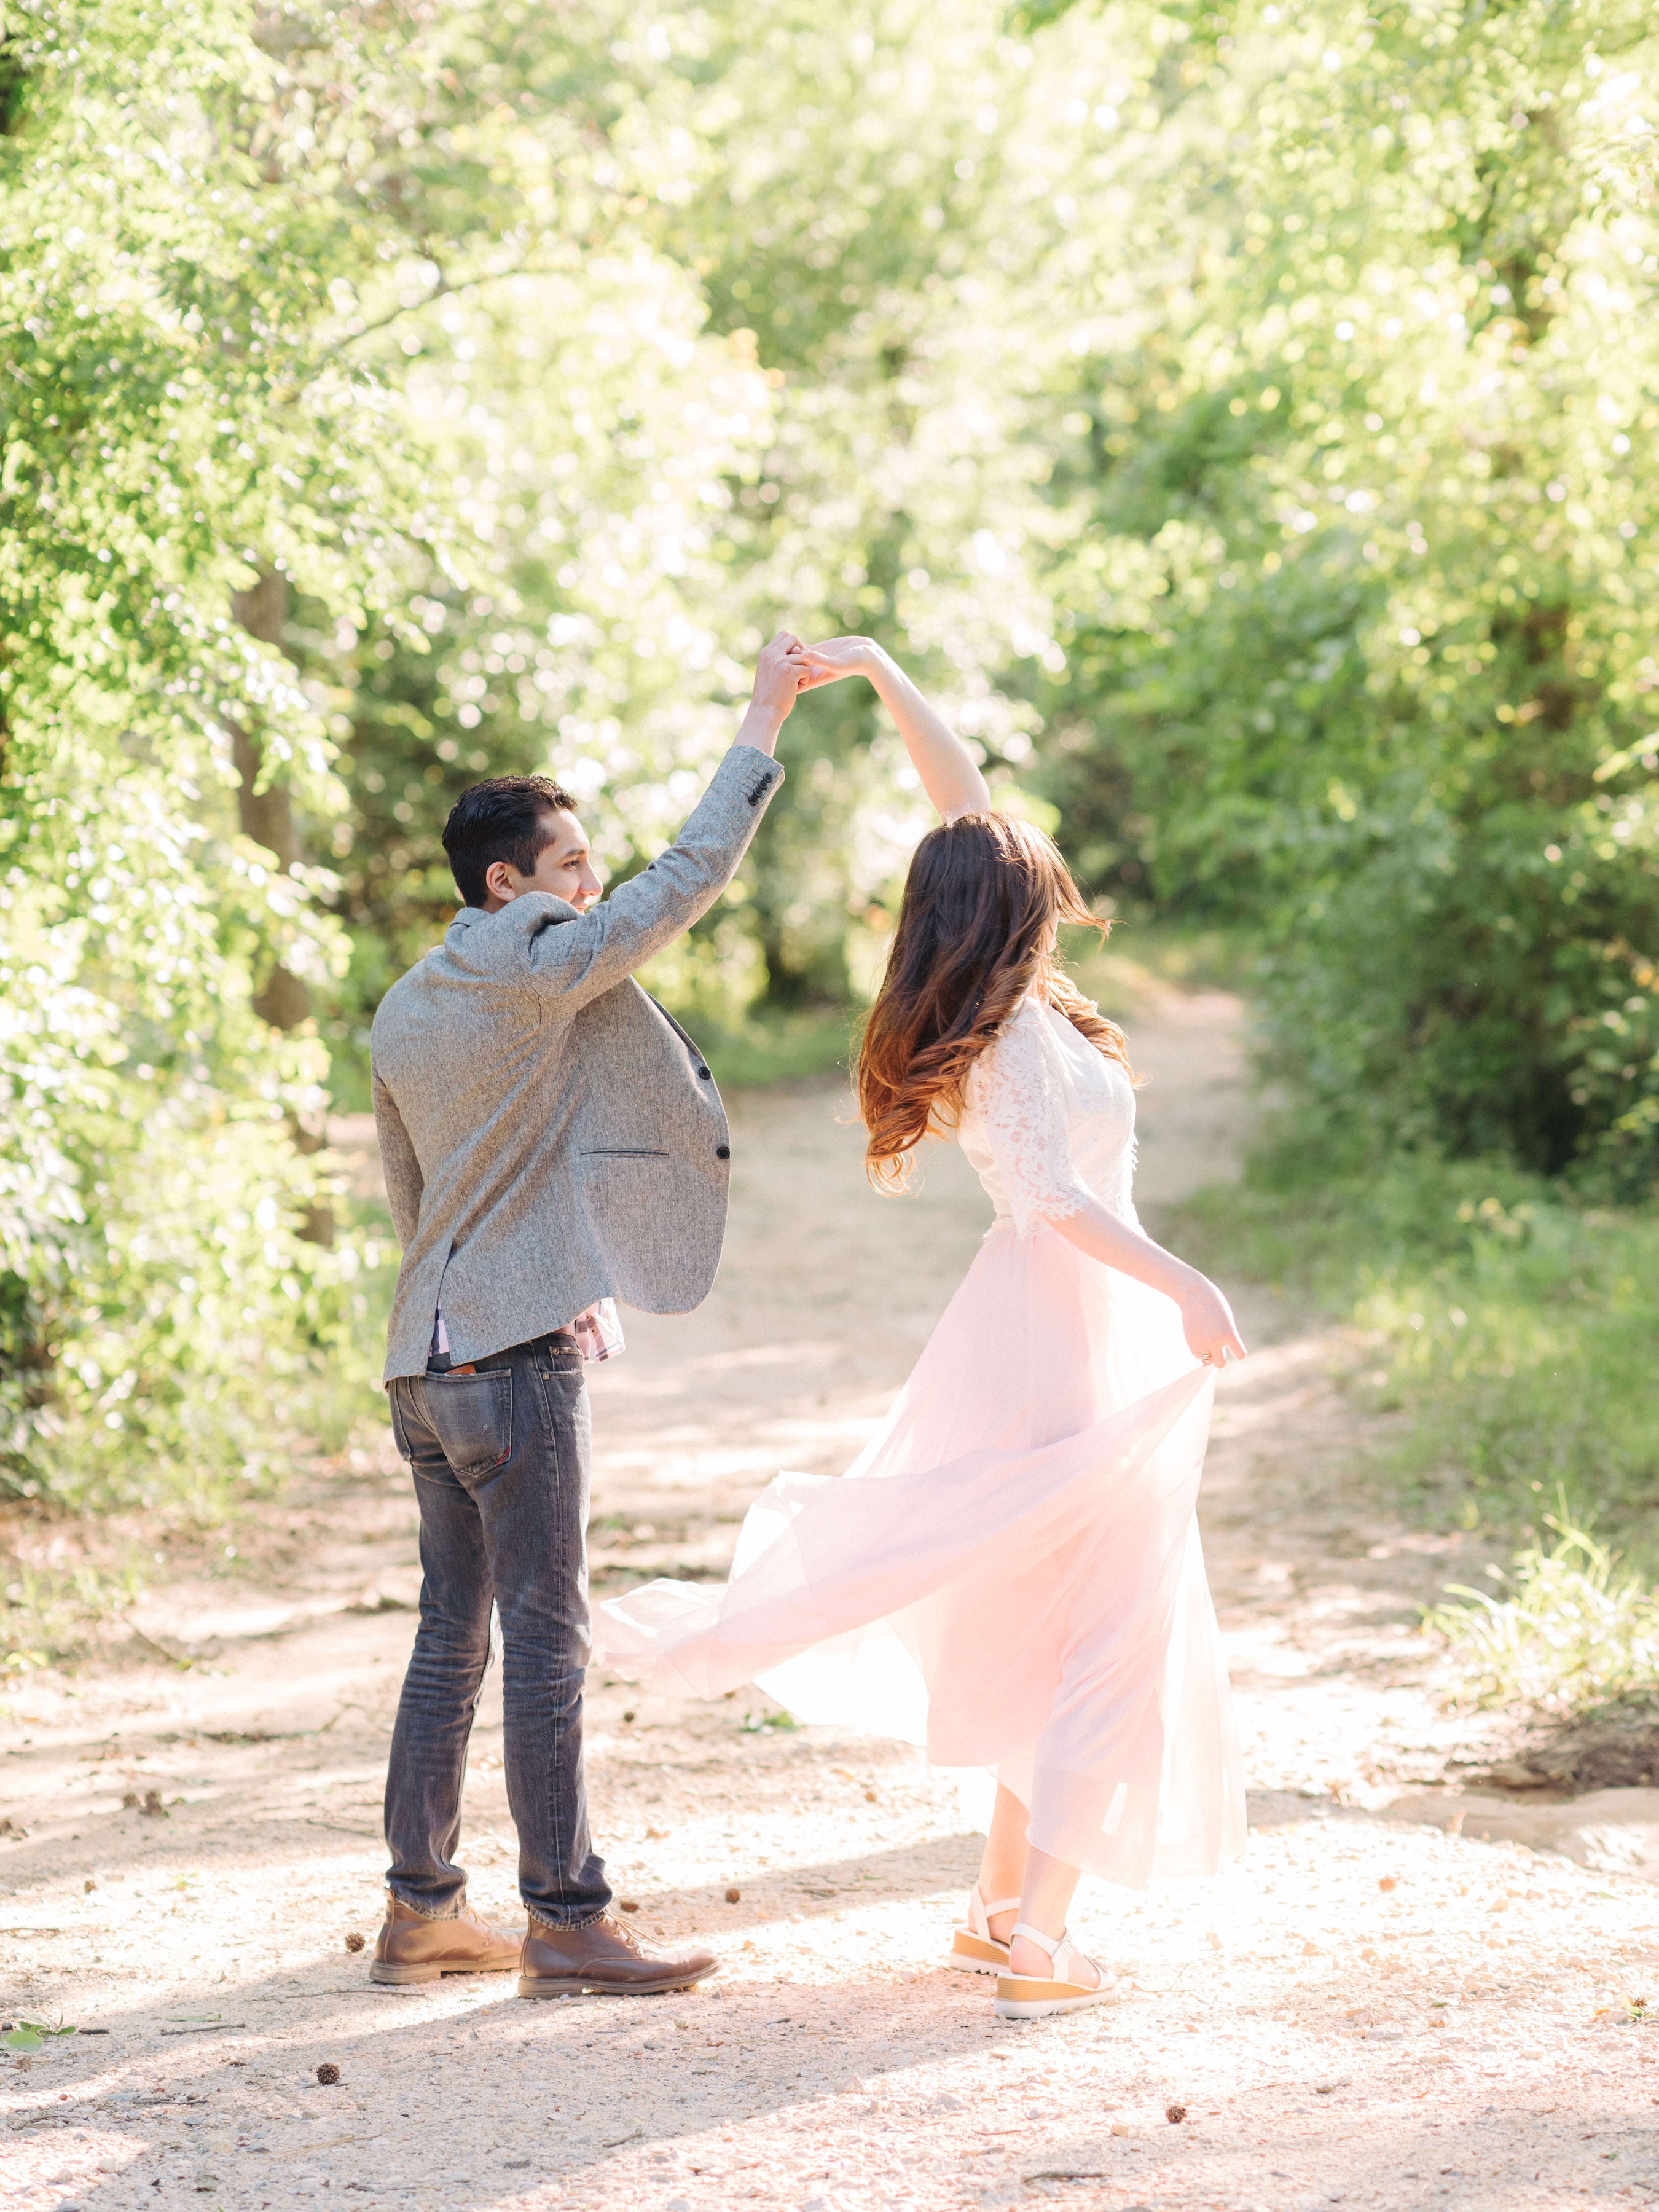 Save The Date Photo Ideas: Guide For Couples | Save the date pictures, Save  the date photos, Pre wedding photos